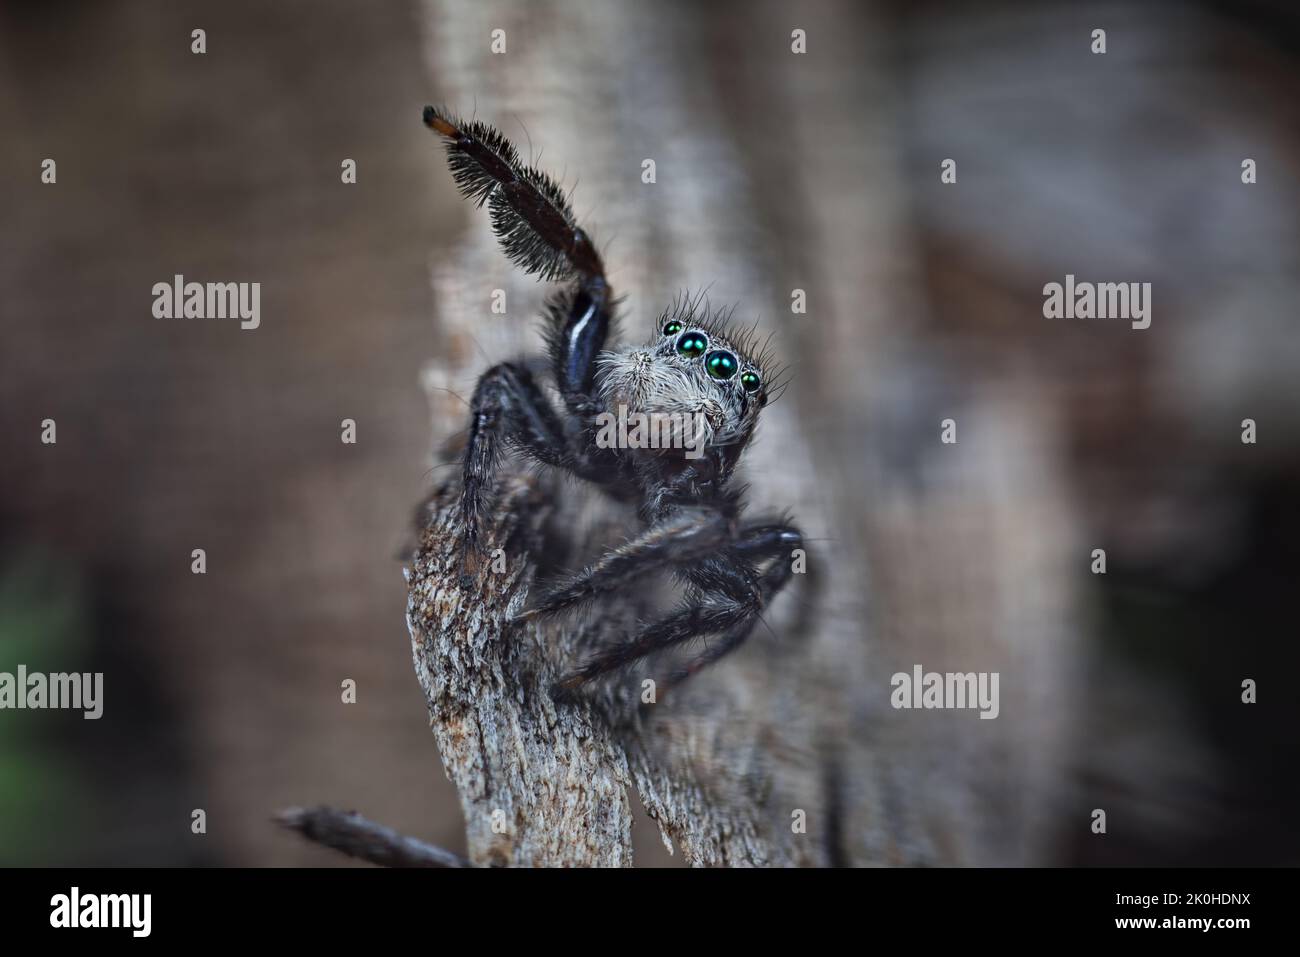 Green eyed jotus jumping spider which is common in the forests of Western Australia Stock Photo